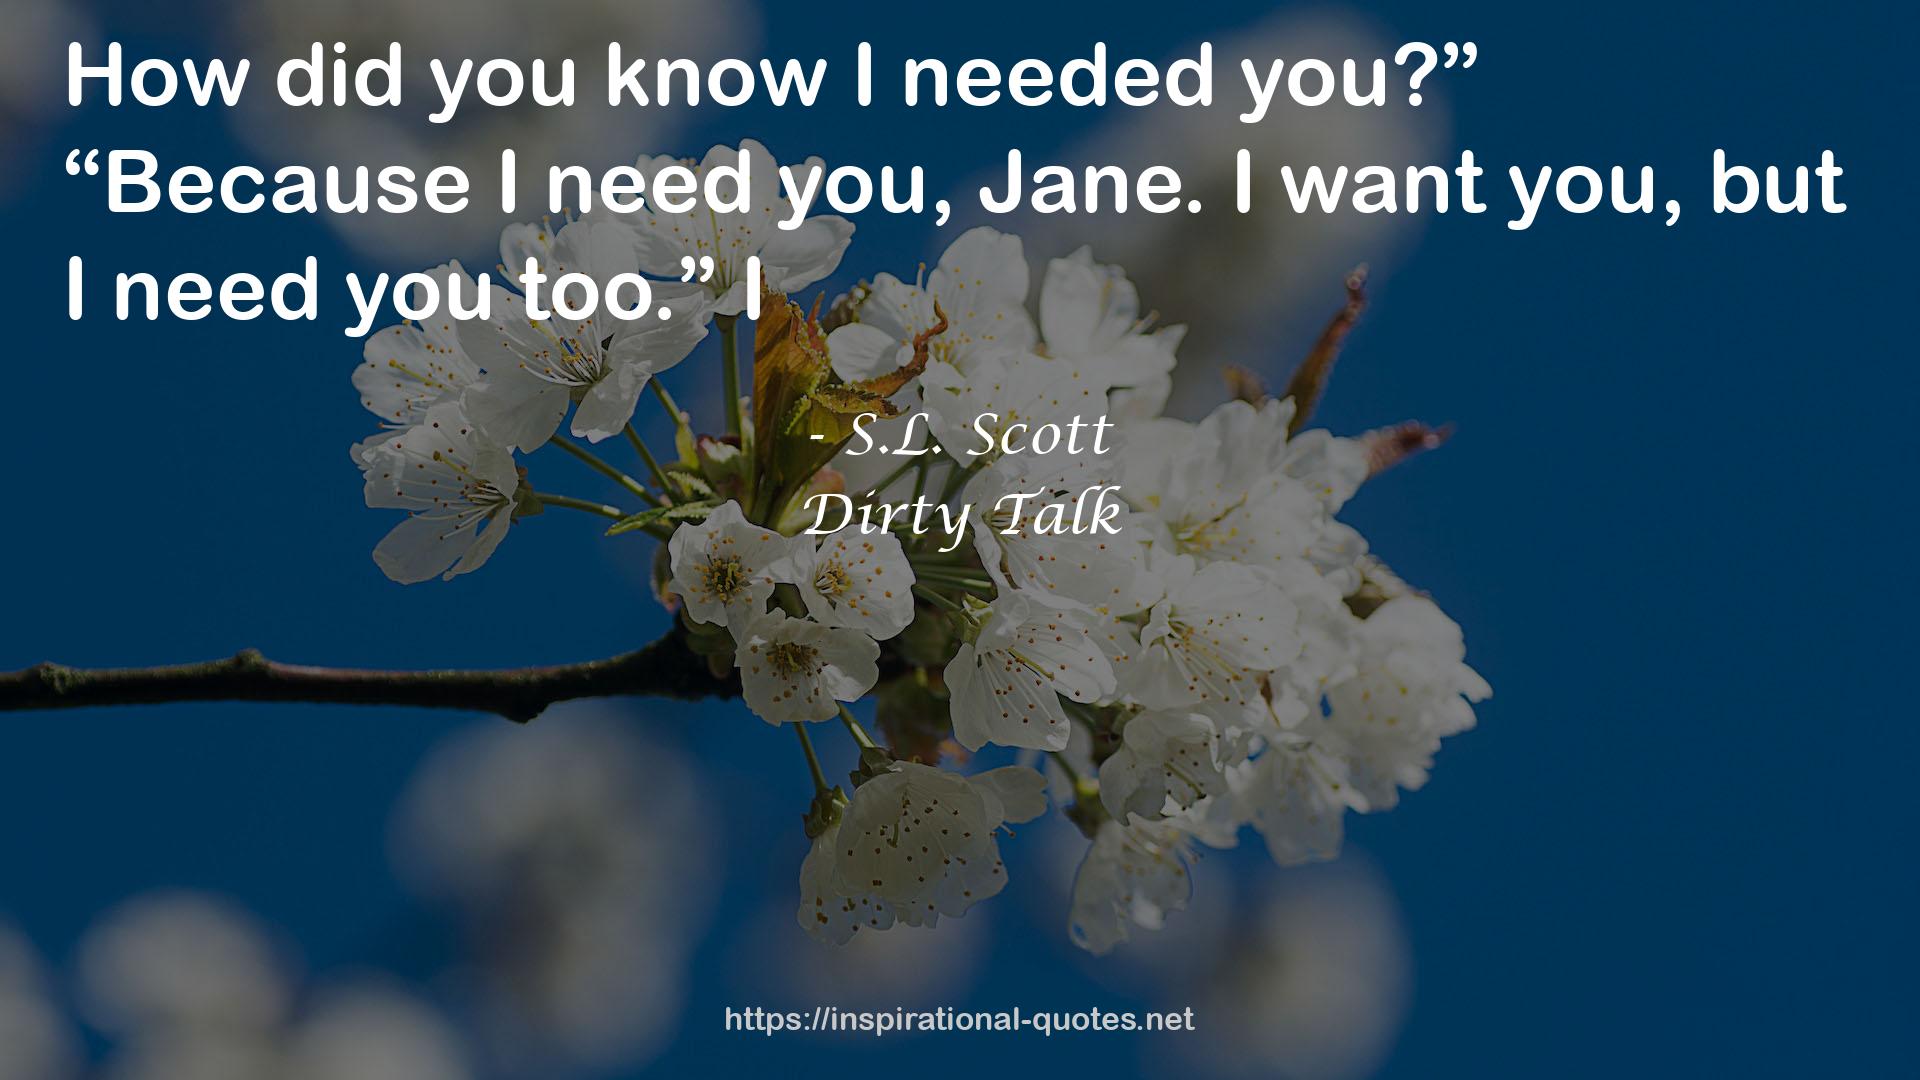 Dirty Talk QUOTES